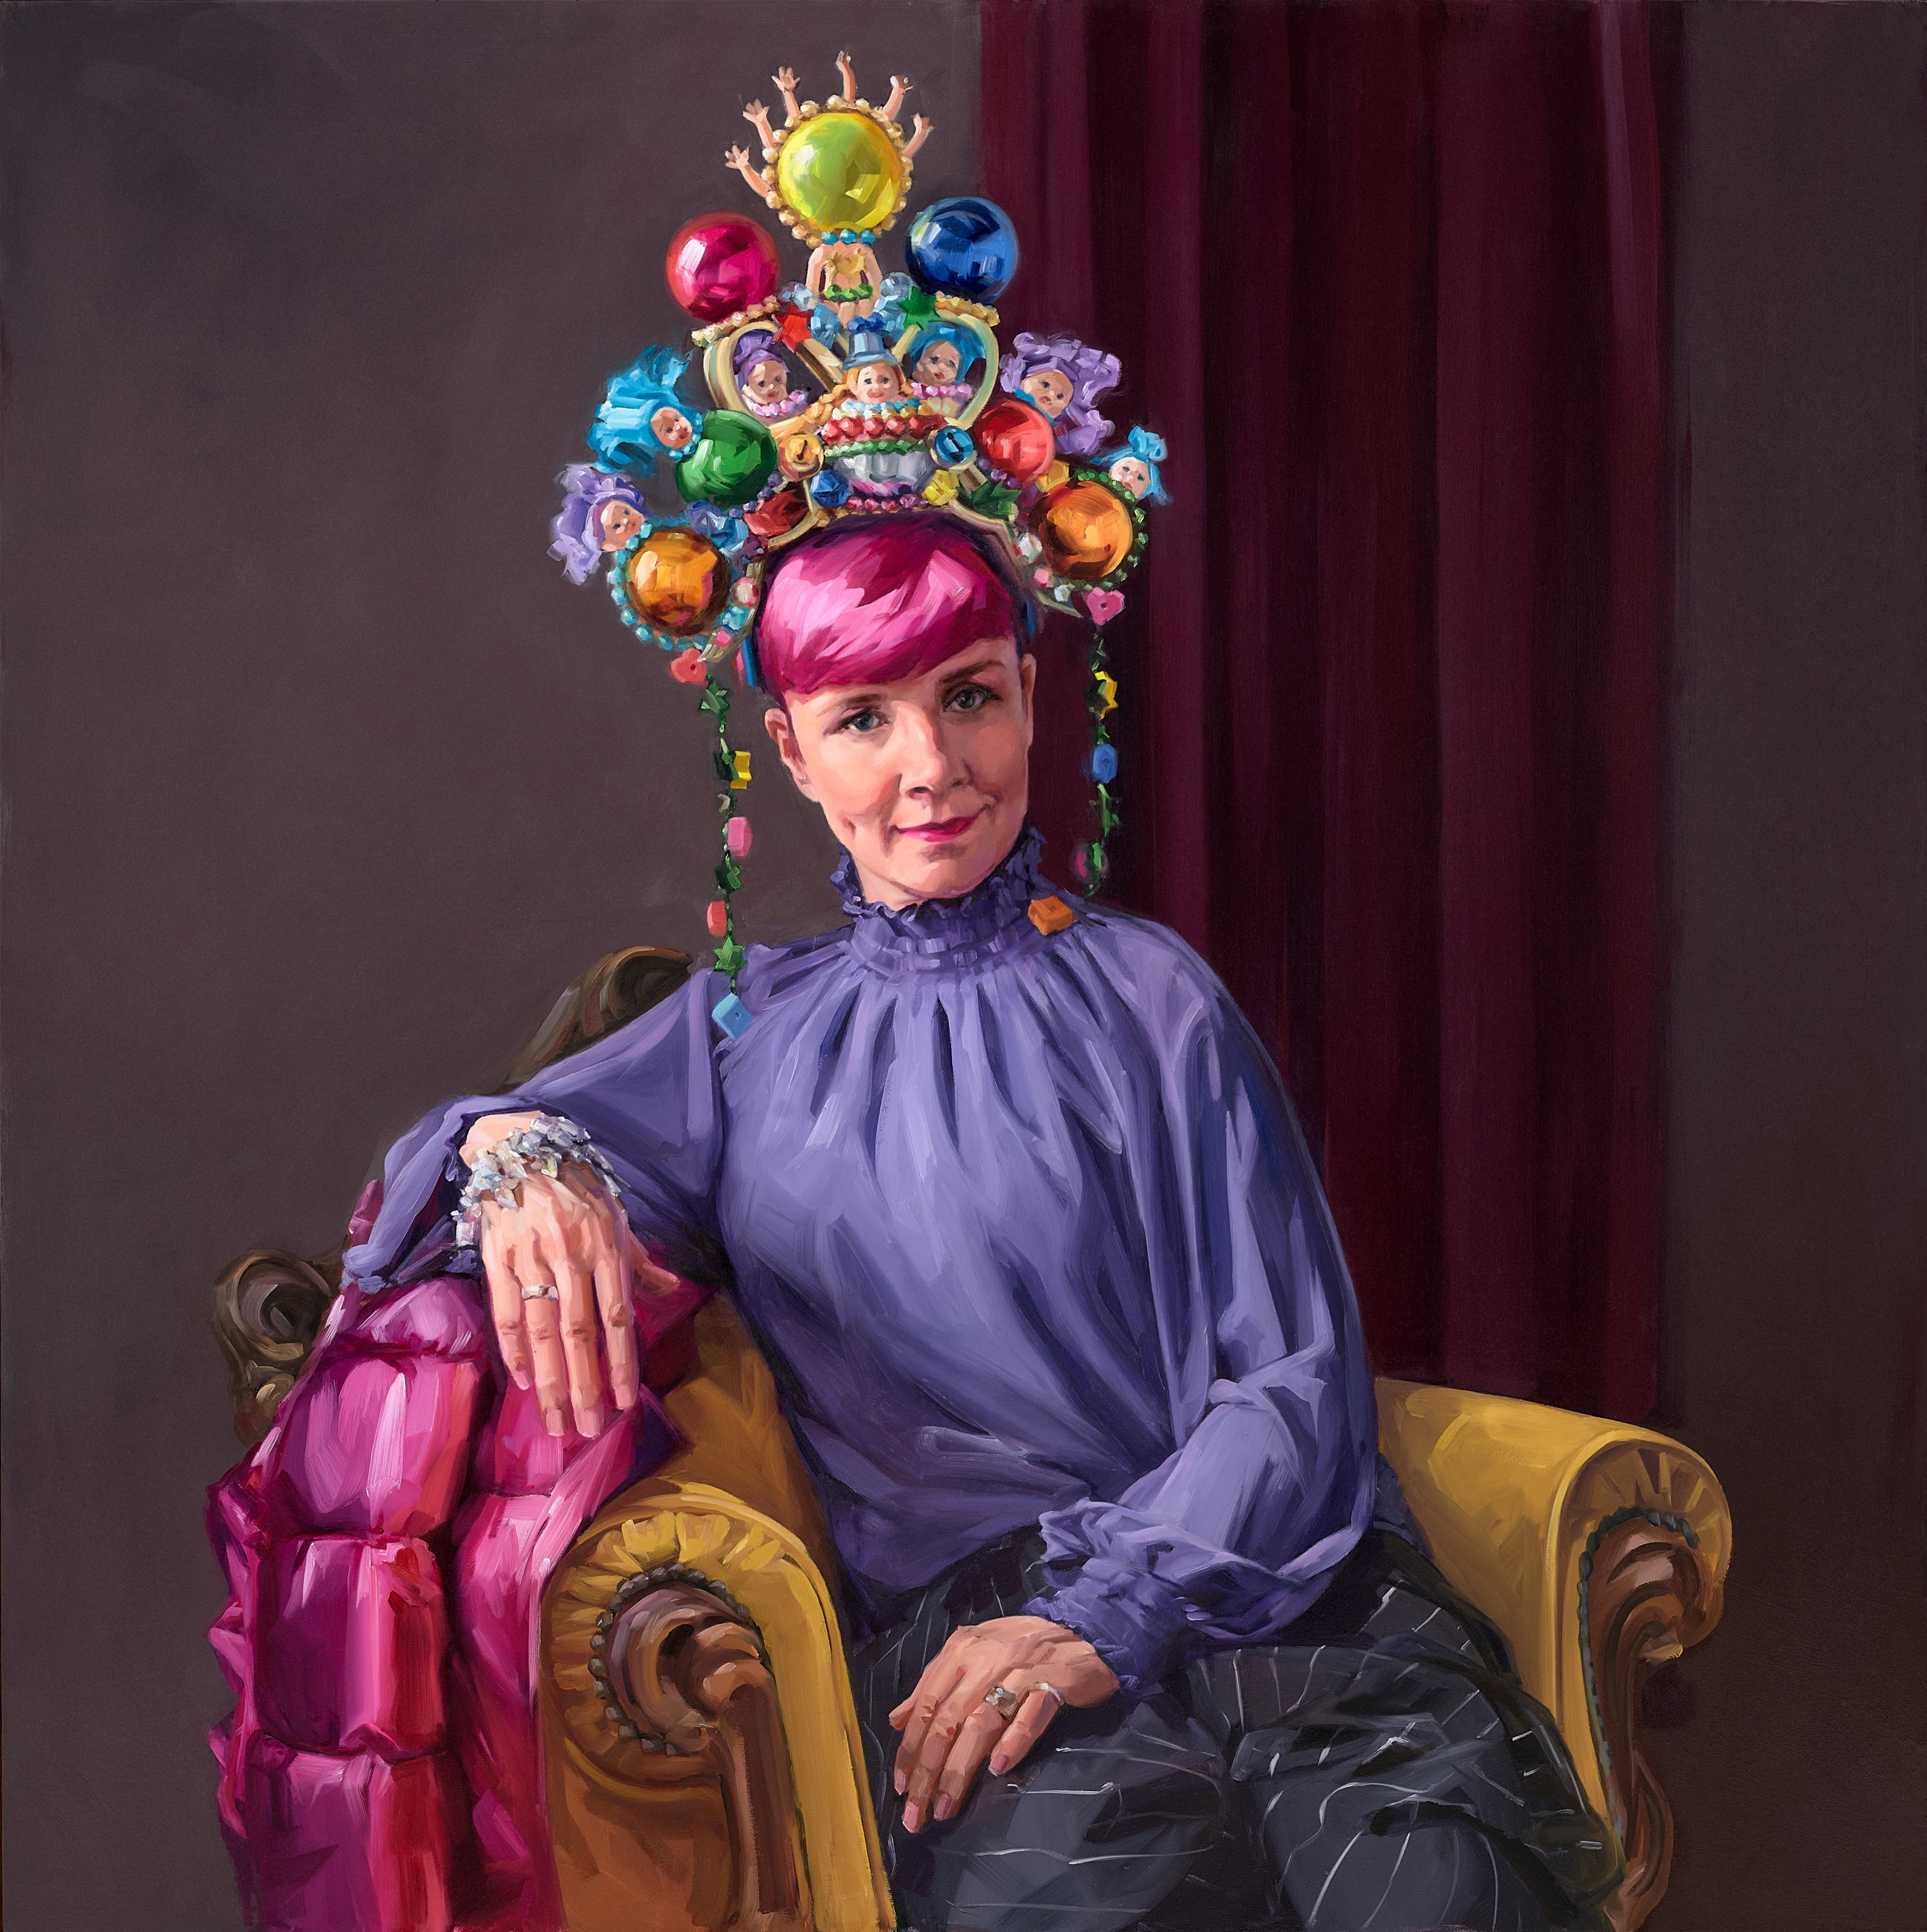 Vibrantly coloured portrait of Cal Wilson, a white woman with pink hair wearing a purple top and elaborate headdress.